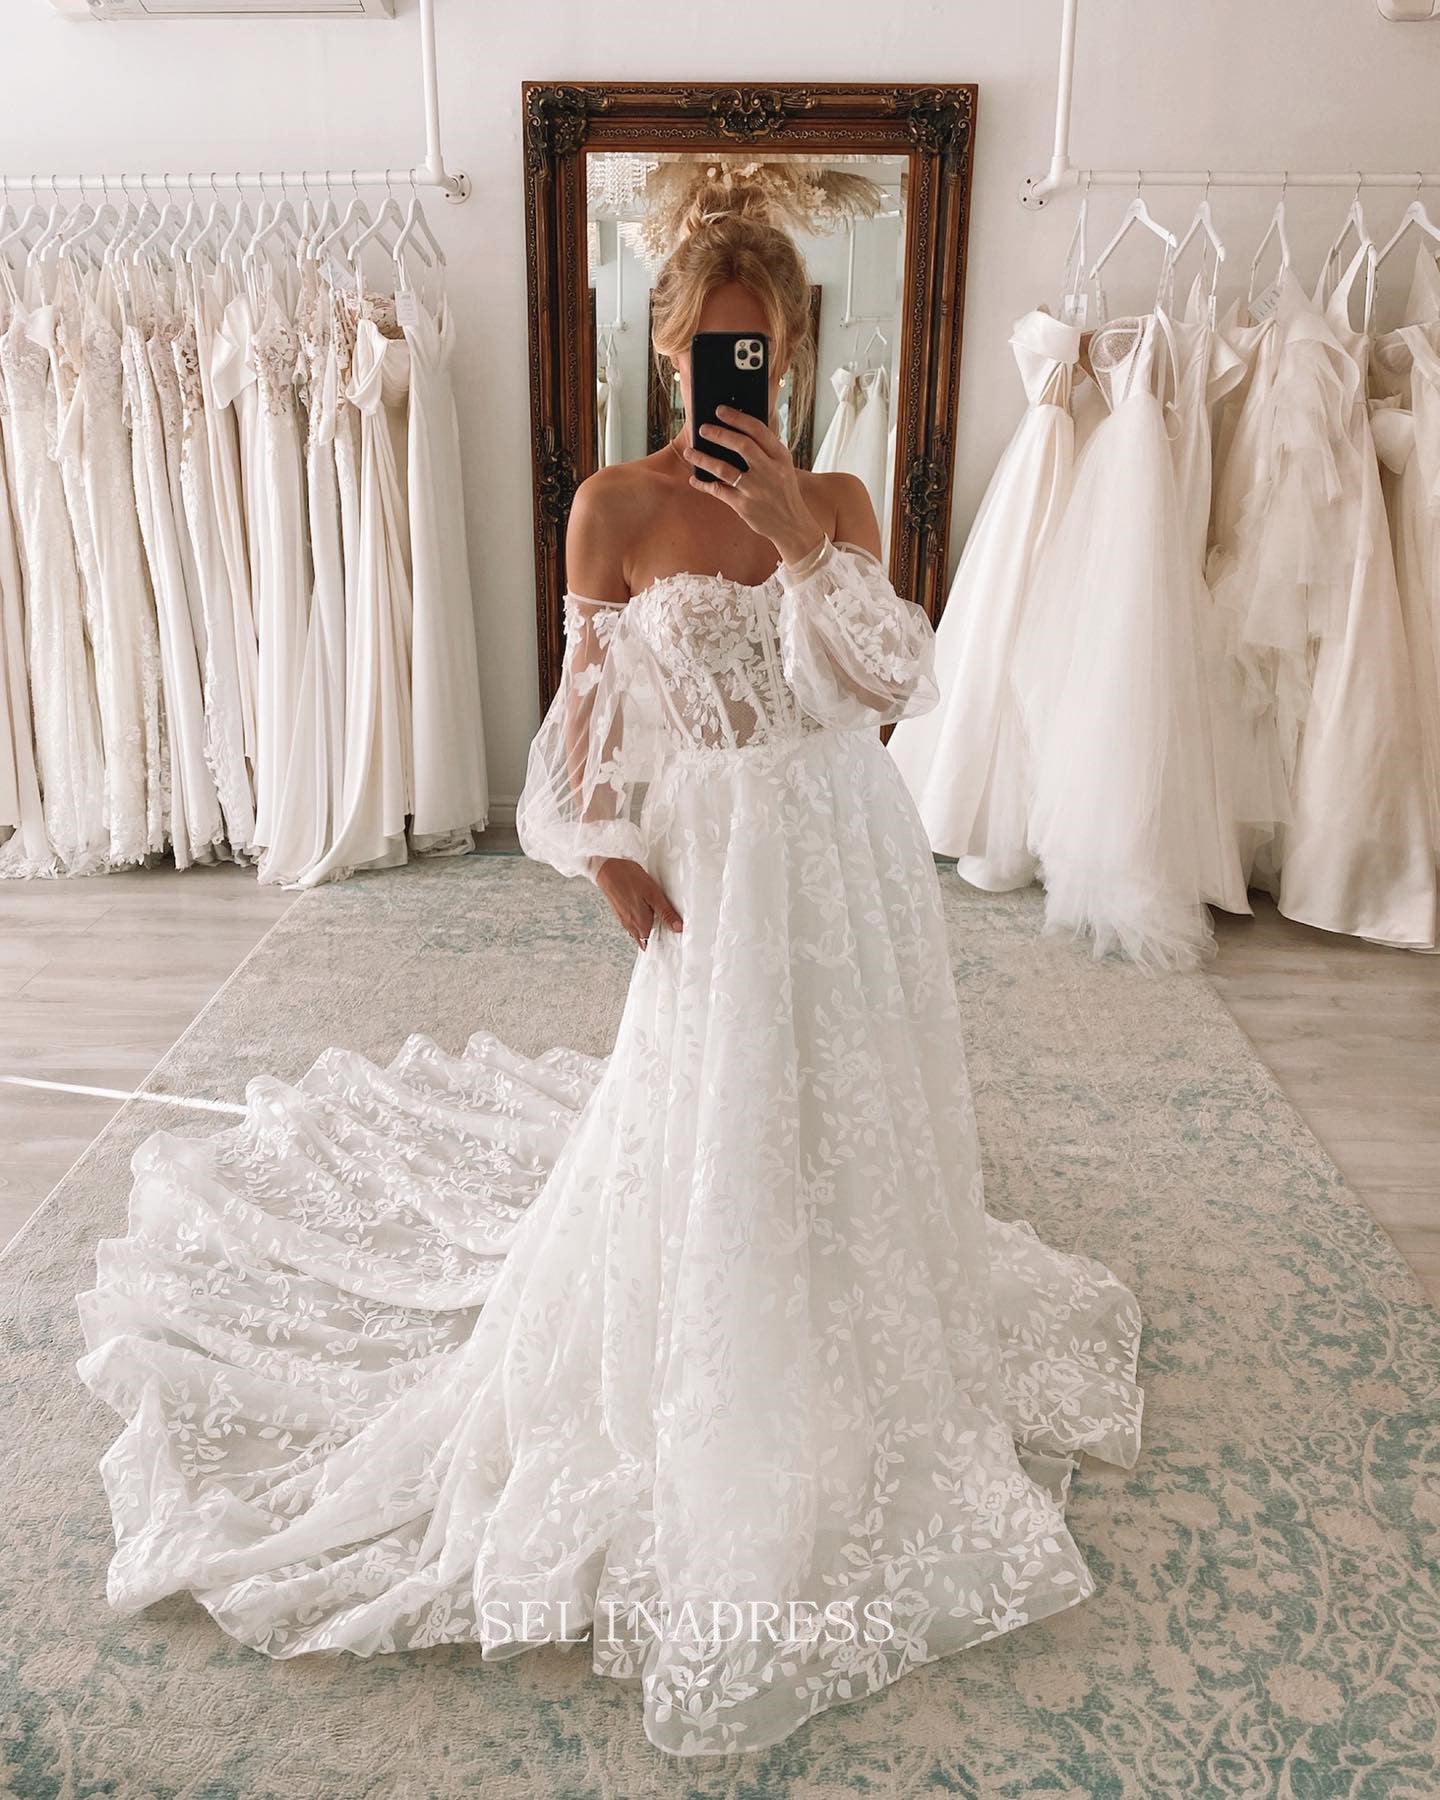 Rustic Gothic Princess Boho Lace Wedding Dress With Off Shoulder Puff  Sleeves And Long Train Hi312Q From Wedswty68, $118.7 | DHgate.Com